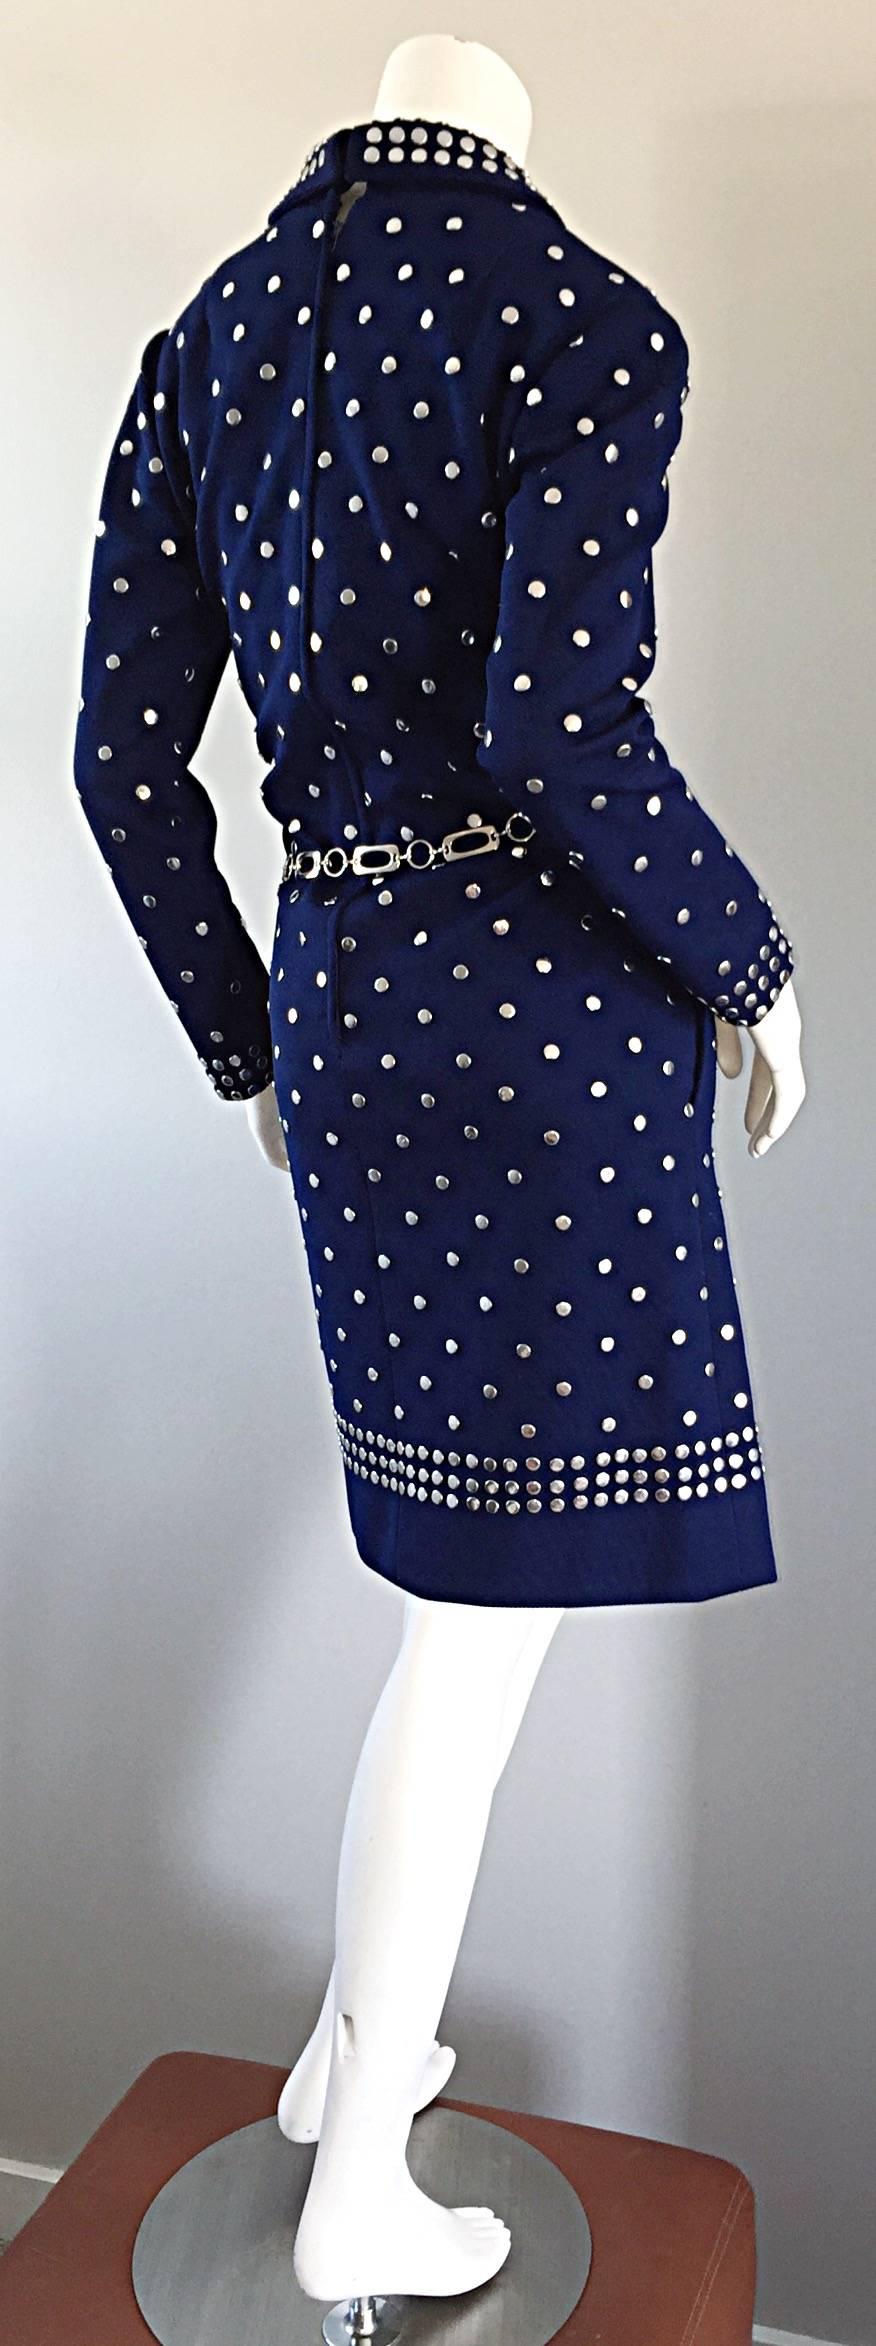 Incredible vintage Donald Brooks navy blue shirt dress, encrusted with hundreds of silver studs throughout! Original silver chain belt, which can also be used for other outfits. Can easily transition from day to night. Great with sandals, flats,